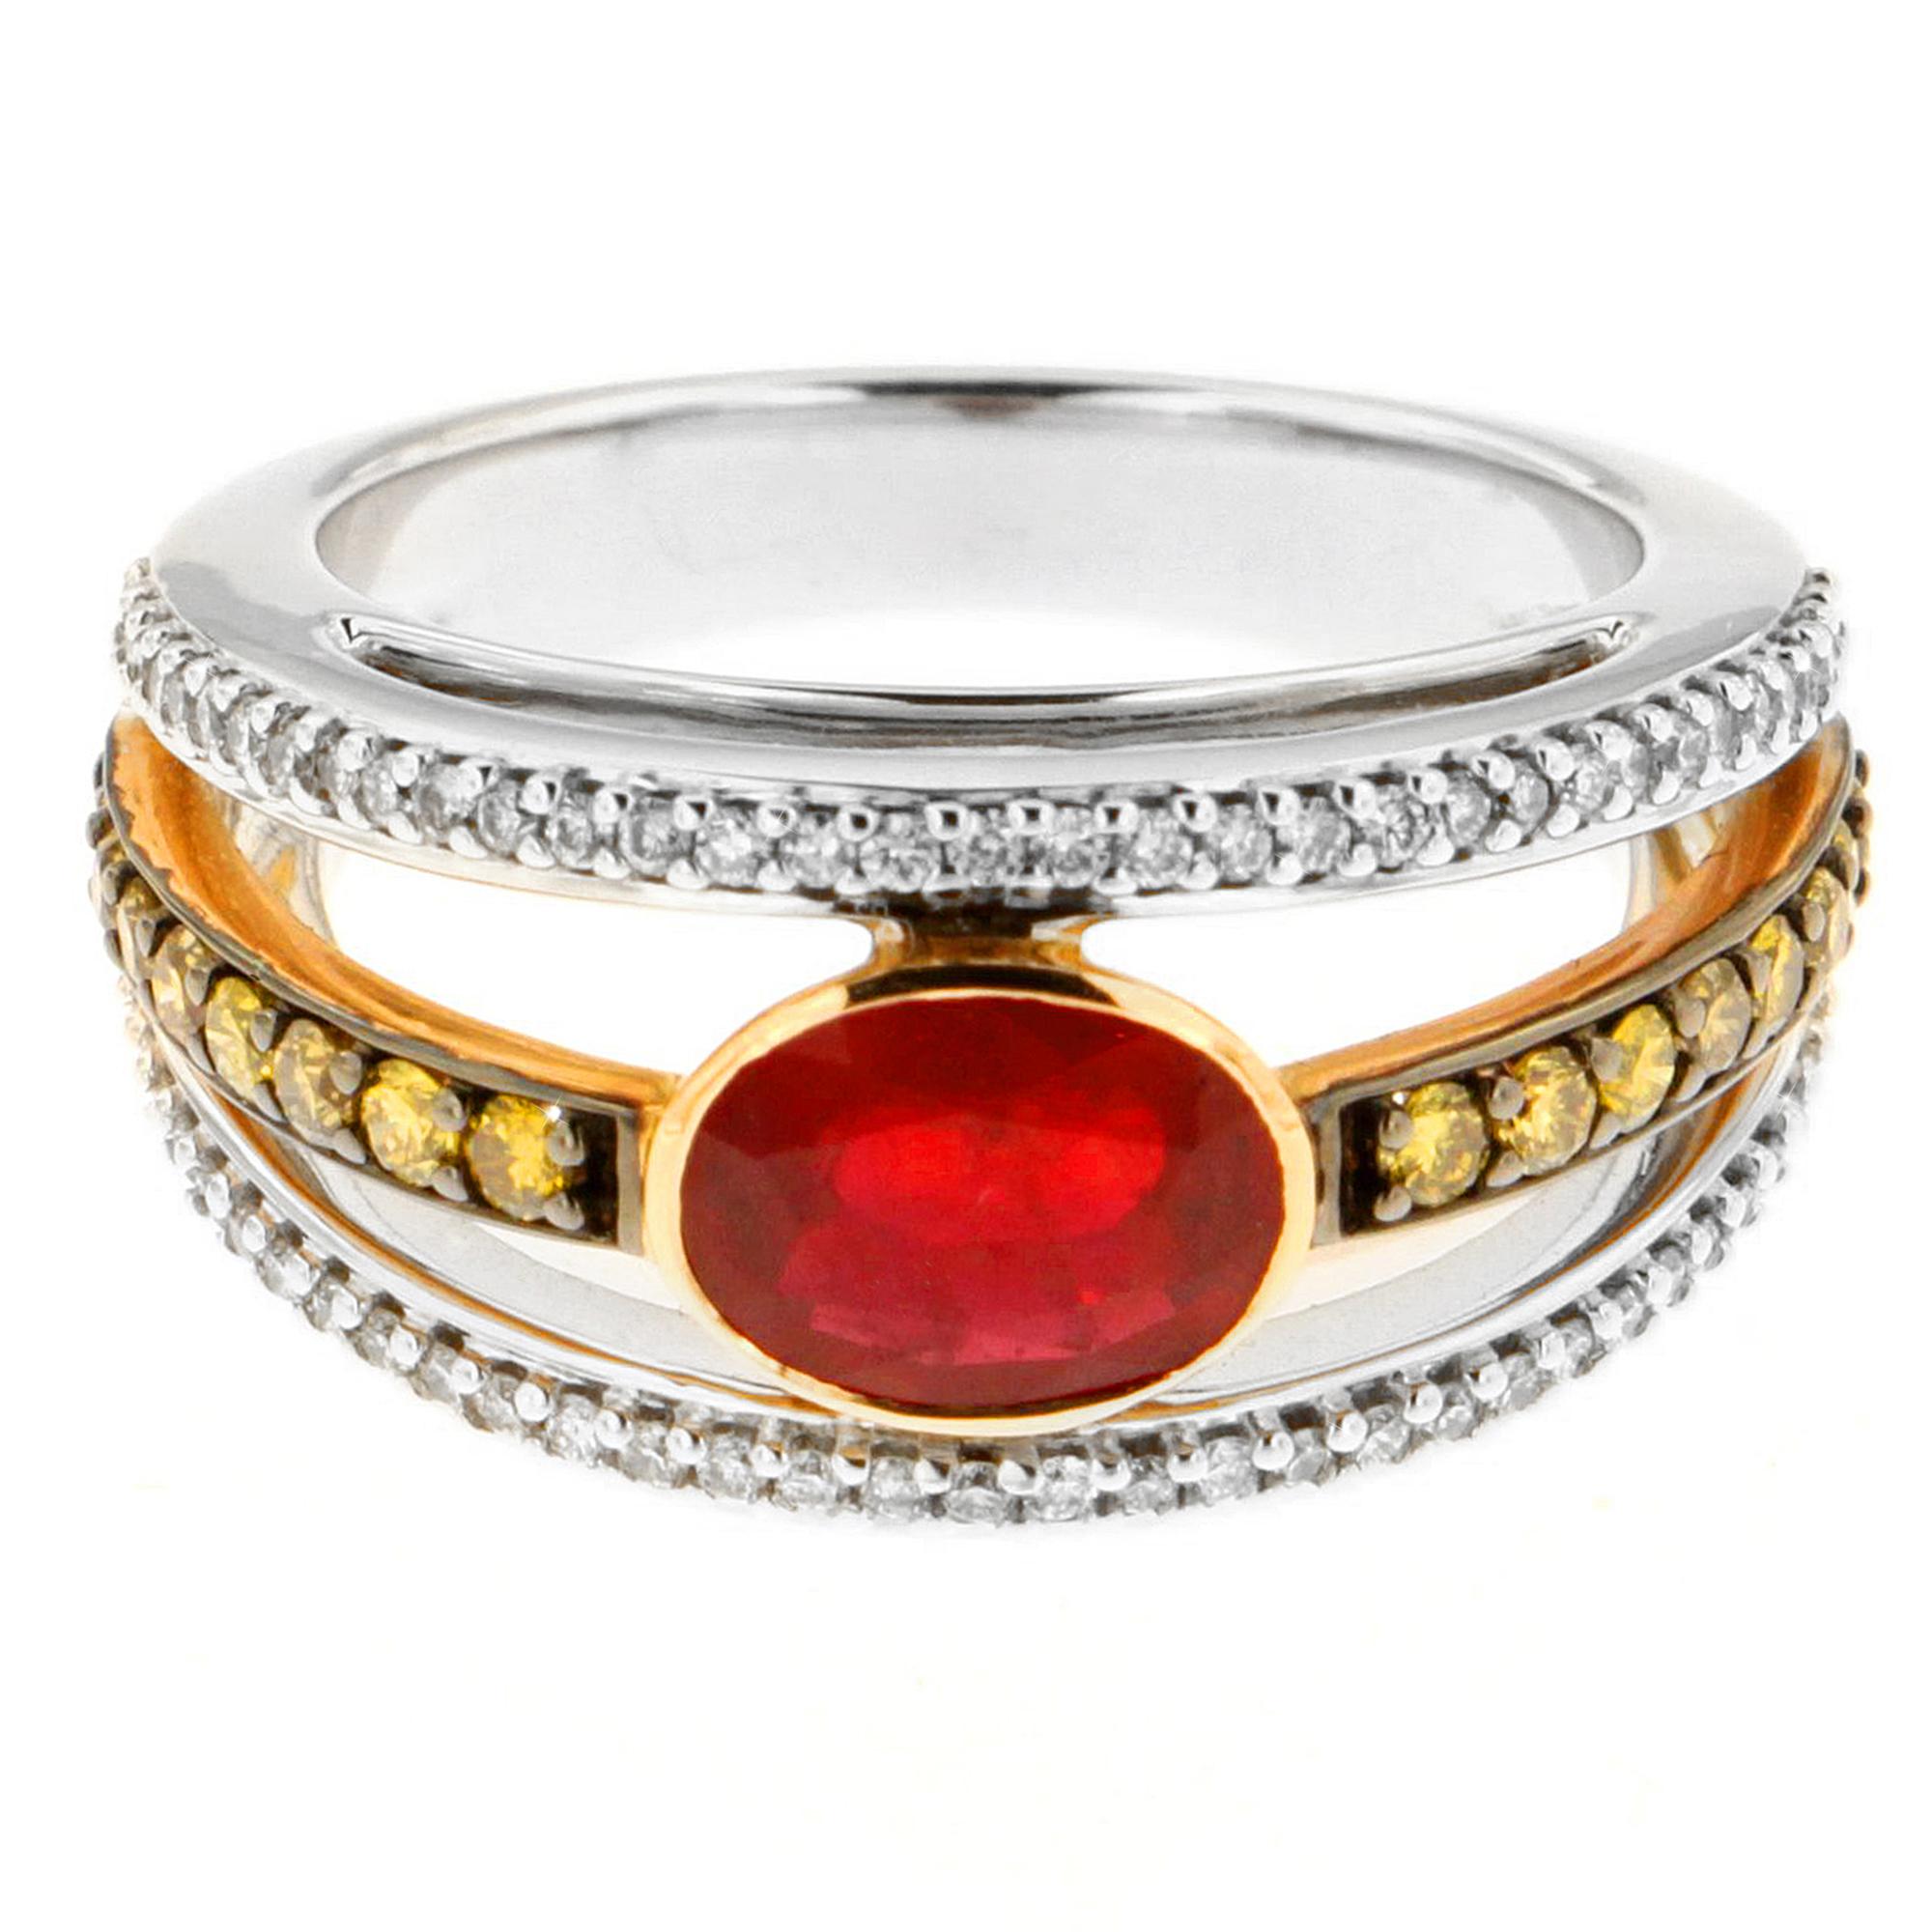 Zorab Creation Ruby with White and Yellow Diamonds Gold Ring In New Condition For Sale In San Diego, CA